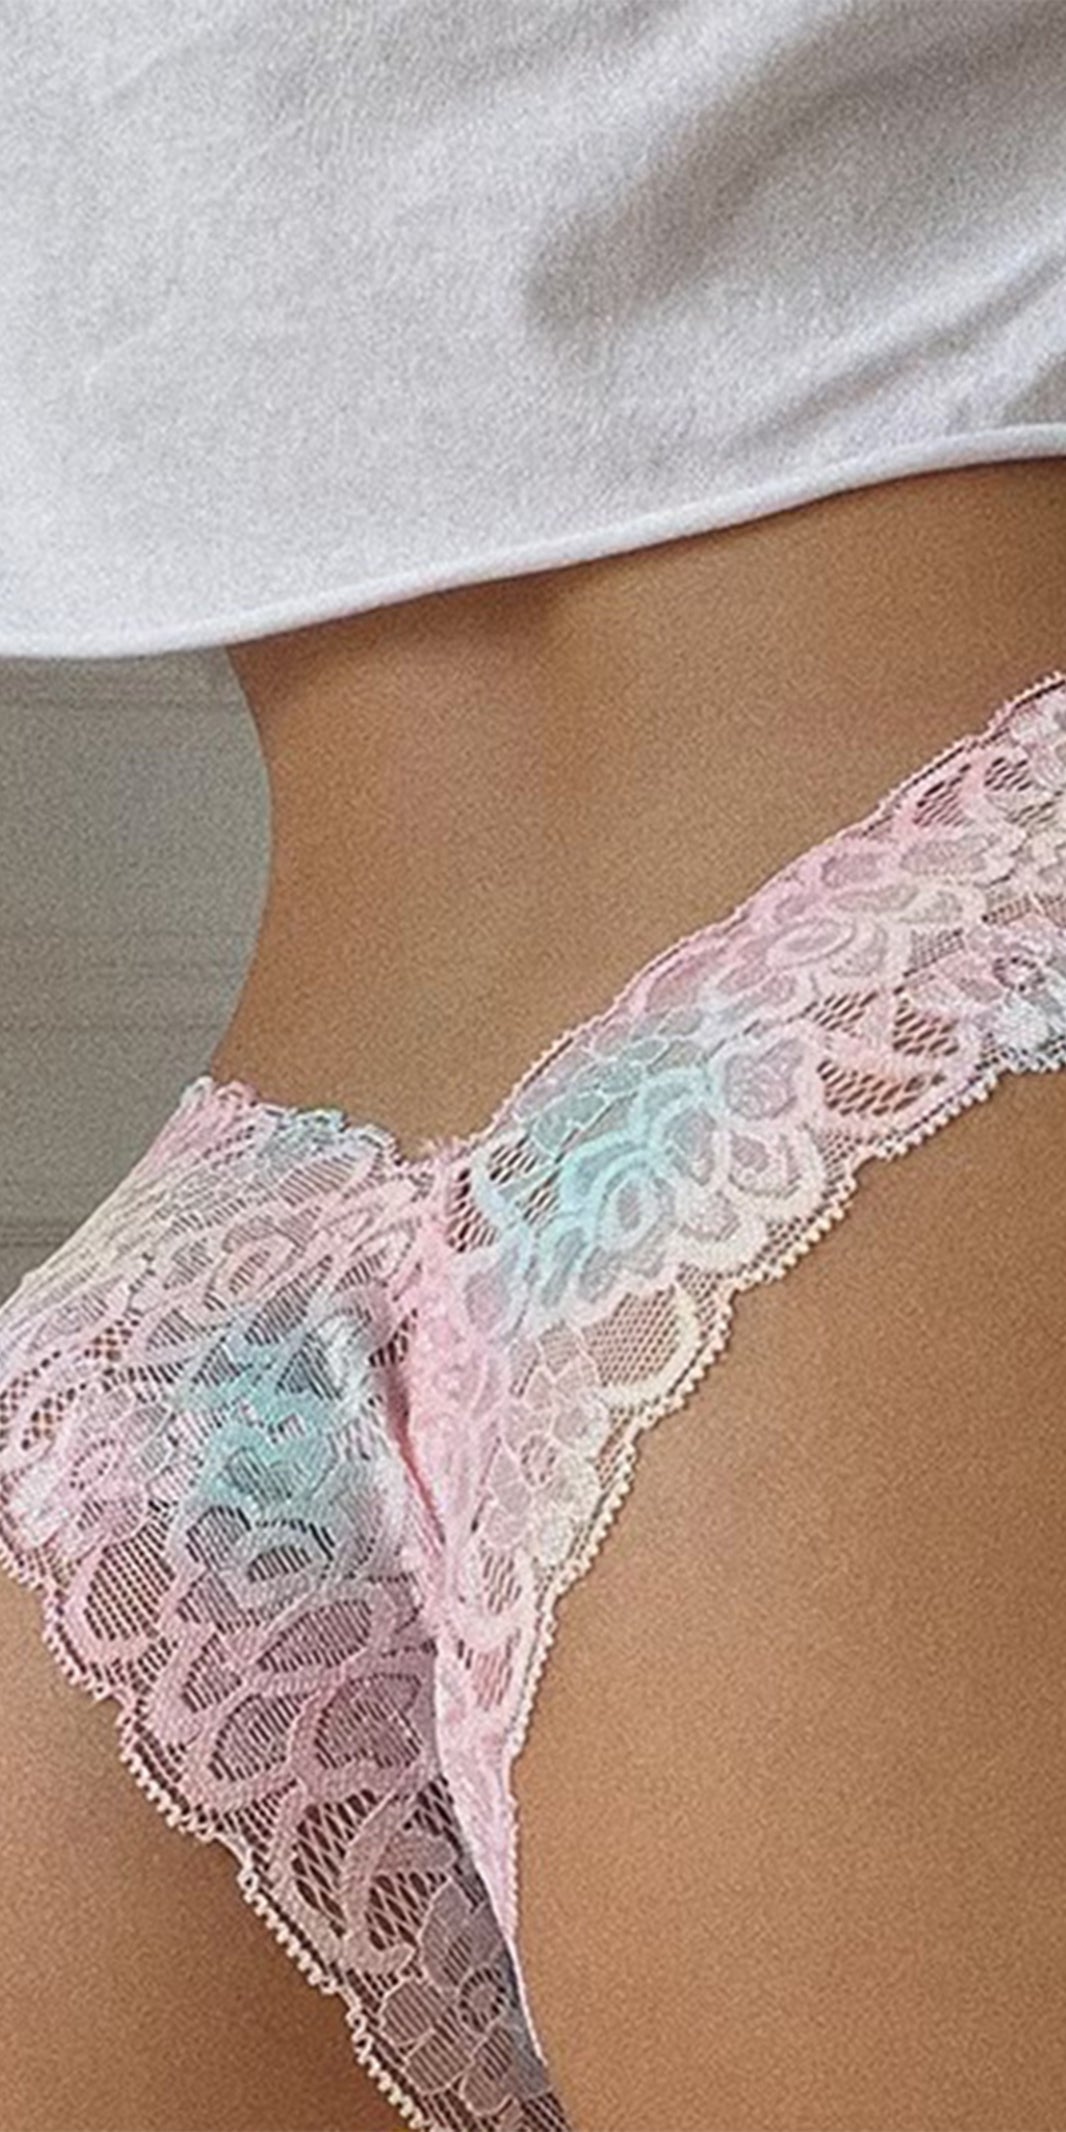 Low Waist Women Floral Lace Sexy Seamless Thong Panties